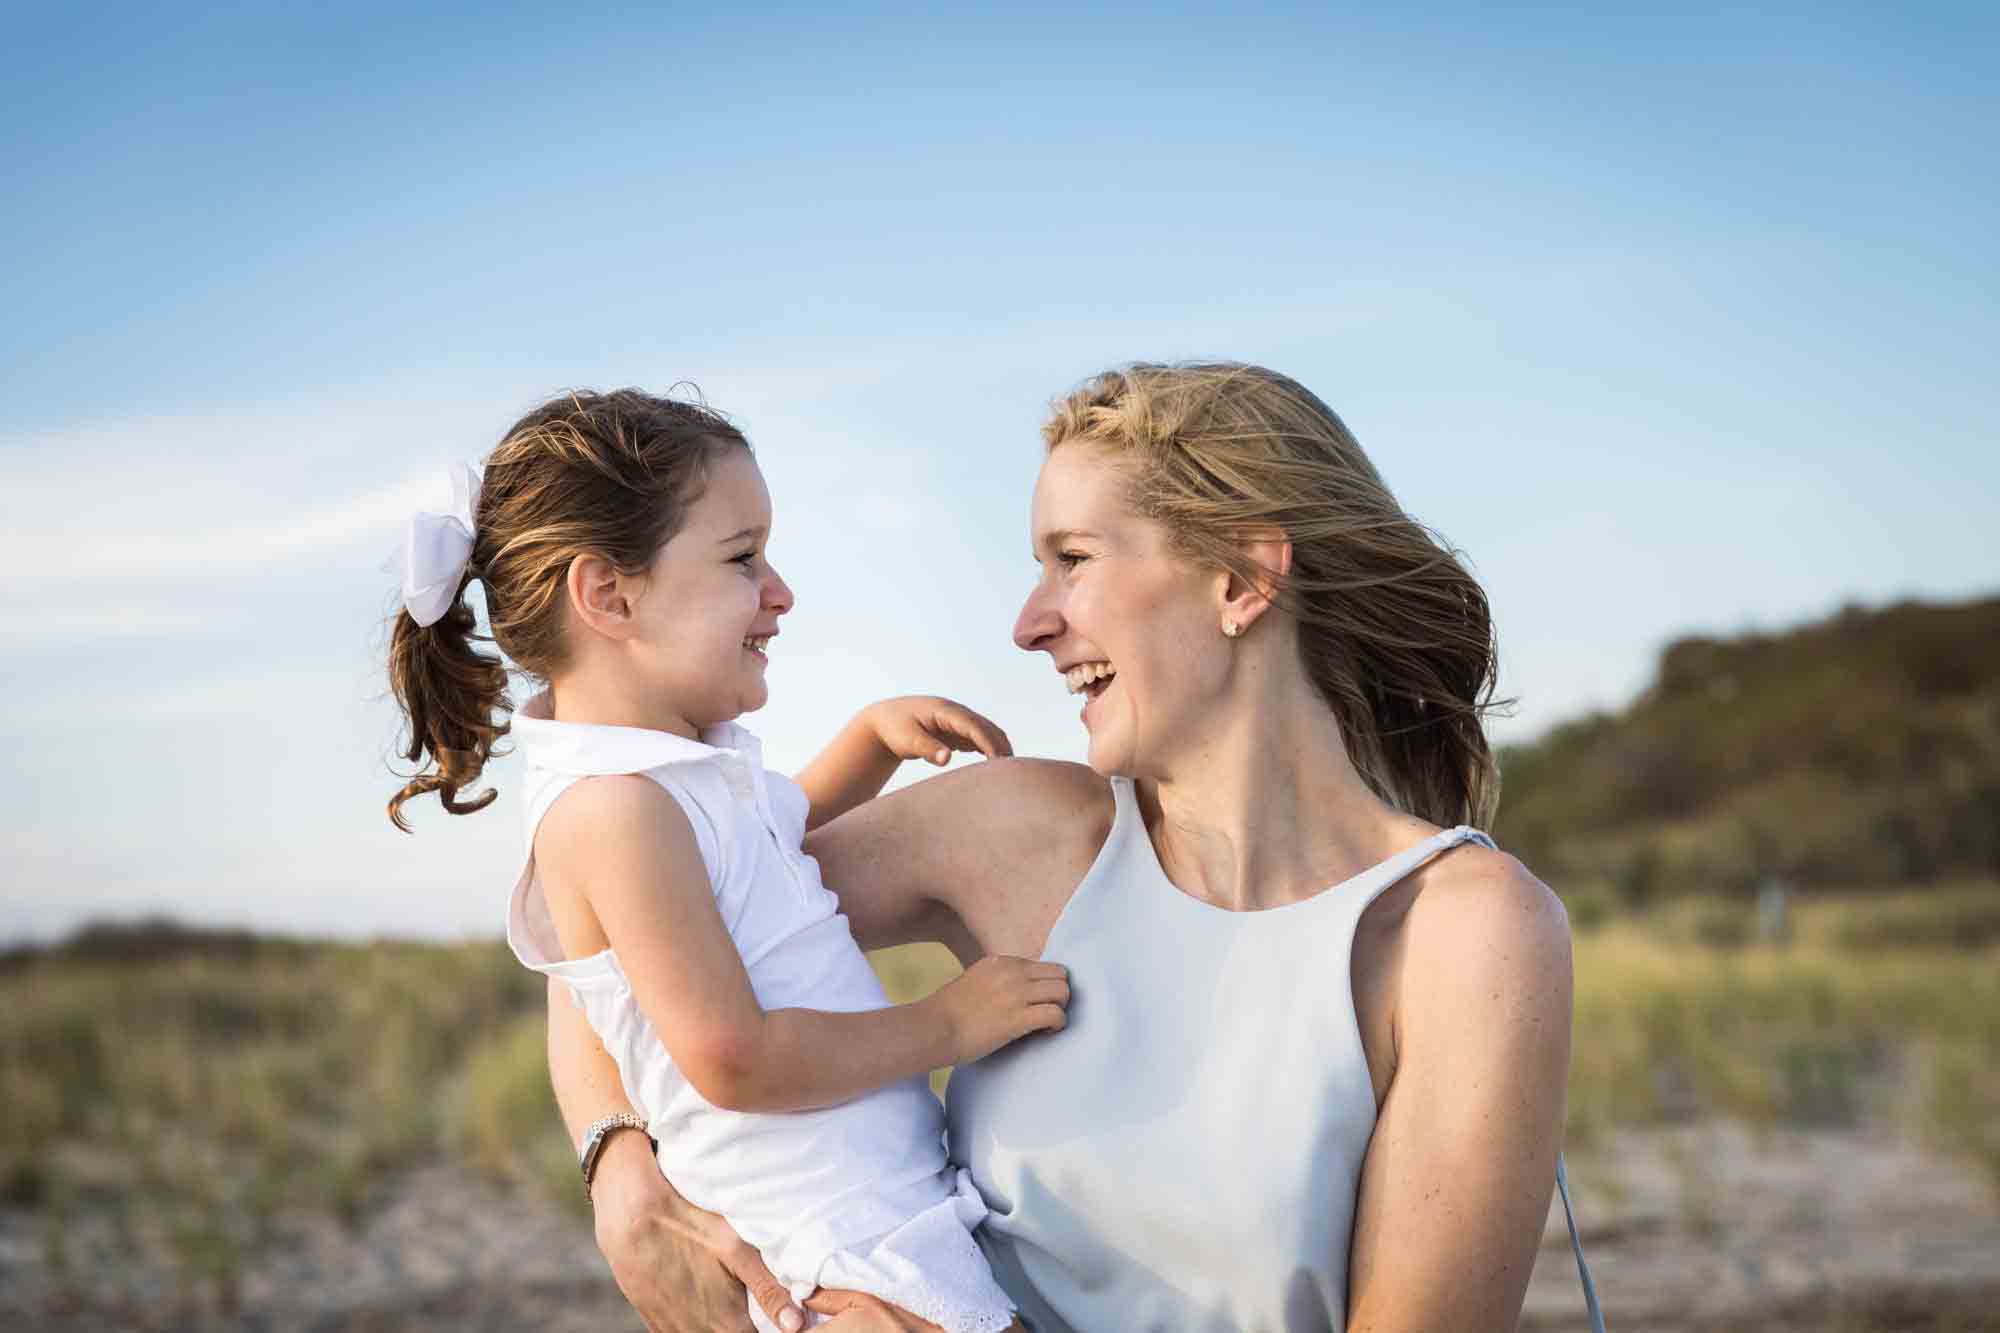 Beach family portrait of mother with blond hair holding small girl